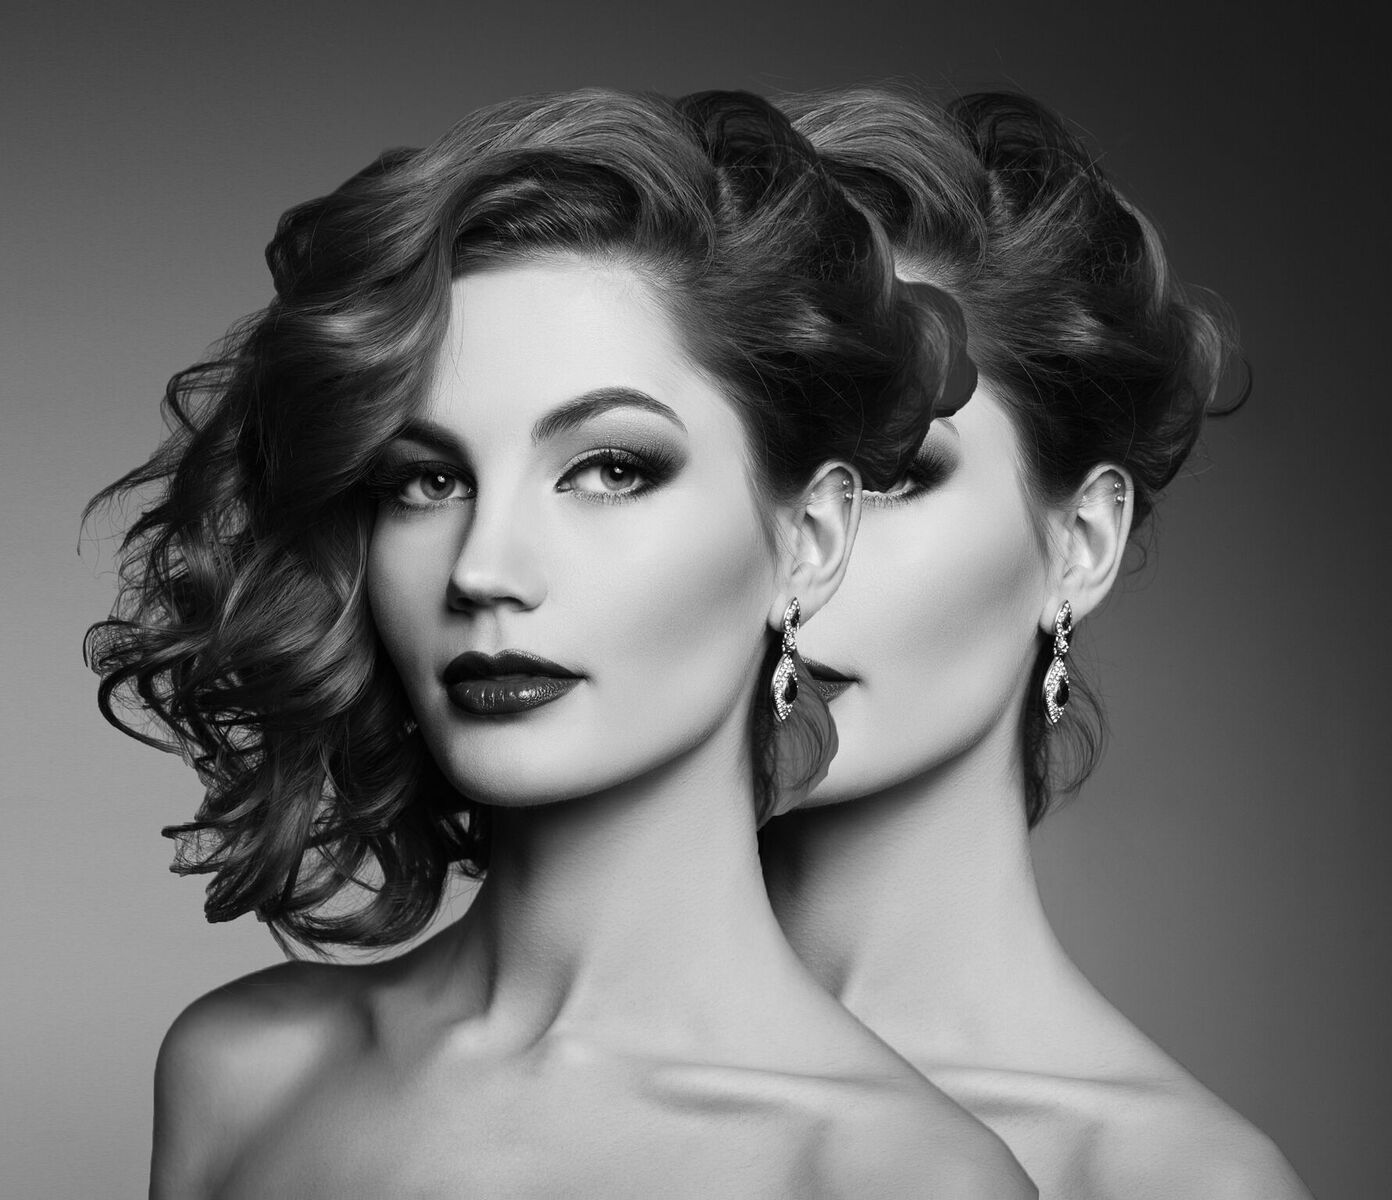 Duplicate image of woman behind herself with makeup on and fancy earrings in black and white